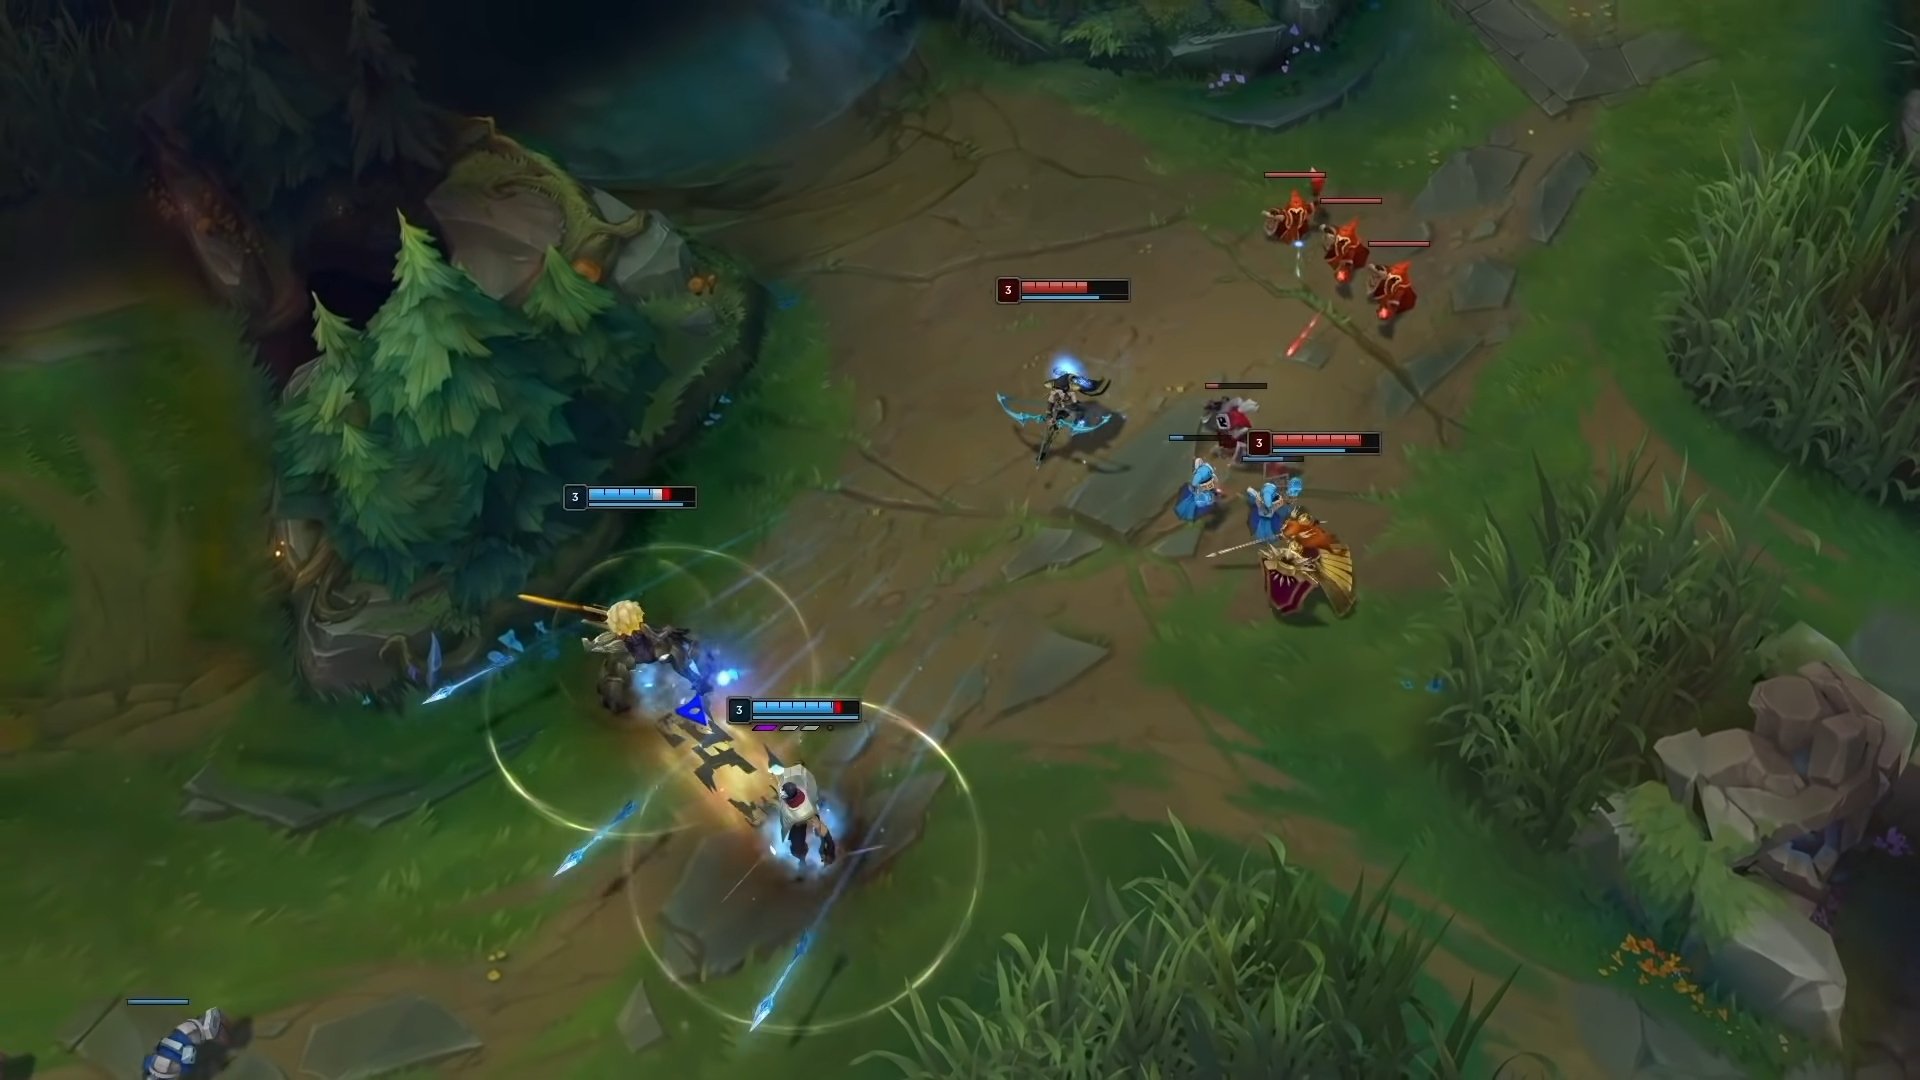 Best free strategy games: a screenshot from League of Legends shows a battle unfolding between a group of characters in a wood.